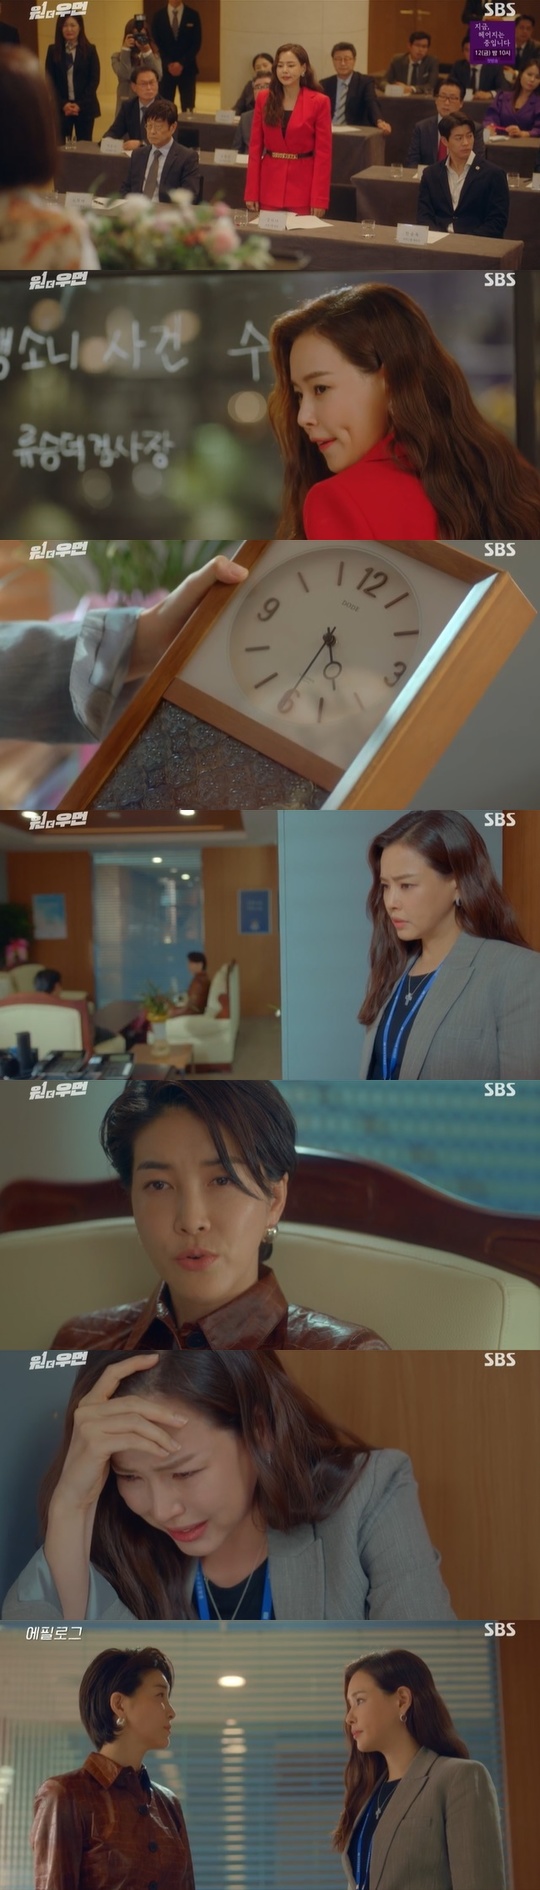 Lee Ha-nui decides to revenge amid revelation of Jin Seo-yeons past crimesIn the 13th episode of SBS gilt drama One the Woman (playplayed by Kim Yoon and directed by Choi Young-hoon), which was broadcast on October 29, the figure of the supporting actor (Lee Ha-nui), who started moving for revenge in earnest, was drawn.In some ways, Cho Yeon-ju handed over the genetic testing traps dug up by Chairman Kang Jang-soo and his paternity match 99.9999% and Han Sung-hye (Jin Seo-yeon) and Kang Eun-hwa (Hwang Young-hee).The supporting actor was surprised by the results, but he was surprised by himself, but he was over the crisis by expressing his displeasure, saying, If you do not get written consent, it is a violation of the personal information law.The supporting actor drove this momentum and made one bomb announcement: That Kang Mi-na (Lee Ha-nui) is now about to put down the position of Yuko Fueki group leader.There was a lot of shortage to perform the presidency without sufficient study.From now on, I will leave all my shares and rights to Han Seung-wook (Lee Sang-yoon), who is also the major shareholder of Yuko Fueki Group holding company, who is left to a professional manager. Han Seung-wook has already spoken with Han Seung-wook. Han Seung-wook has quit his role as a strong player and said, The total number of seats was not suitable for the real Kang Mina.Please announce it at the extraordinary shareholders meeting. All of this ended up being what Cho Yeon-ju and Han Seung-wook wanted.So naturally, the supporting actor who left the week with his own necessity in the week set up Susa headquarters in Han Seung-wooks house and started to enter Susa in earnest.And the supporting actor of this process set Ryu Seung-deok (Kim Won-hae) as the right target.Cho Yeon-ju caught Susa, who was watching him under Ryu Seung-deoks instructions, and made him hand over only censored photos, and Ahn Yoo-joon (Lee Won-geun) deliberately went to see Ryu Seung-deok and laid a wiretap application on his mobile phone.Meanwhile, Han Sung-hye (Jin Seo-yeon), who was overwhelmed by his father, Han Yeong-sik (National Hwan), and was deprived of the Hanju Hotel, set up a new initiative.Han Sung-hye said, I begged people who did not even want to give me, so I lived so tired. When I saw the supporting actor in the news, he said, It is the easiest thing to get rid of all of them.Soon Han Sung-hye ordered his secretary Jung Do-woo (Kim Bong-man) to make an appointment with Ryu Seung-deok.At the same time, the supporting actor broke the suspicion of Ryu Seung-deoks money transaction.The article was published by Han Seung-wooks father, a French media company, in a Korean branch of the French press, which was the owner of the hospitality, money envelope, and check photo of Ryu Seung-deoks tablet PC.The supporting actor predicted, There is only one way to survive when a person is driven to the edge of a cliff.Ryu Seung-deok, who was refused to contact the actual han yeong-sik, showed a han yeong-sik and Chuck.Ryu Seung-deok threatened Han young-sik with an incident 14 years ago.Cho Yeon-ju bugged these phone calls between Ryu Seung-duk and han young-sik, and found that Ryu Seung-duk was keeping evidence 14 years ago in the safest place.Cho Yeon-ju recalled the memories of the past and speculated that the place was Ryu Seung-deoks laboratory, saying, Han young-sik chairman you are now caught.Han Sung-hye, who caught a clue to the real identity of the supporting actor at a similar time, headed to the inspection room to meet Ryu Seung-deok. At the same time, the supporting actor noticed and noticed a suspicious watch in the inspection room.Cho succeeded in hiding just before Han Sung-hye entered Ryu Seung-deoks laboratory, and Han Sung-hye and Ryu Seung-deoks solo band, where the supporting actor was hiding.Han Sung-hye proposed to Ryu Seung-deok as a director of the Hanju Group instead of solving the corruption data to blow the han yong-sik.The shocking truth of this process was revealed: both the person who handled Lee Bong-sik (Kim Jae-young) and the person who gave the grandmother of the supporting actor 14 years ago were Han Sung-hye.Han Sung-hye said that Ryu Seung-deoks first deal with the chairman of the han yeong-sik was to hide the case, saying, Who is so interested in the elderly persons dead Acident?Ryu Seung-deok continued his evil behavior by suggesting to Han Sung-hye, I will arrest the chairman of the han yeong-sik, so you should do the assistant test.The truth remained. On this day, Han Seung-wook found out that the person who visited the factory at the time of his fathers death was Han Sung-hye, not Han Yeong-sik, through Kim Isa (Kim Kyung-shin, Je Su-jeong).